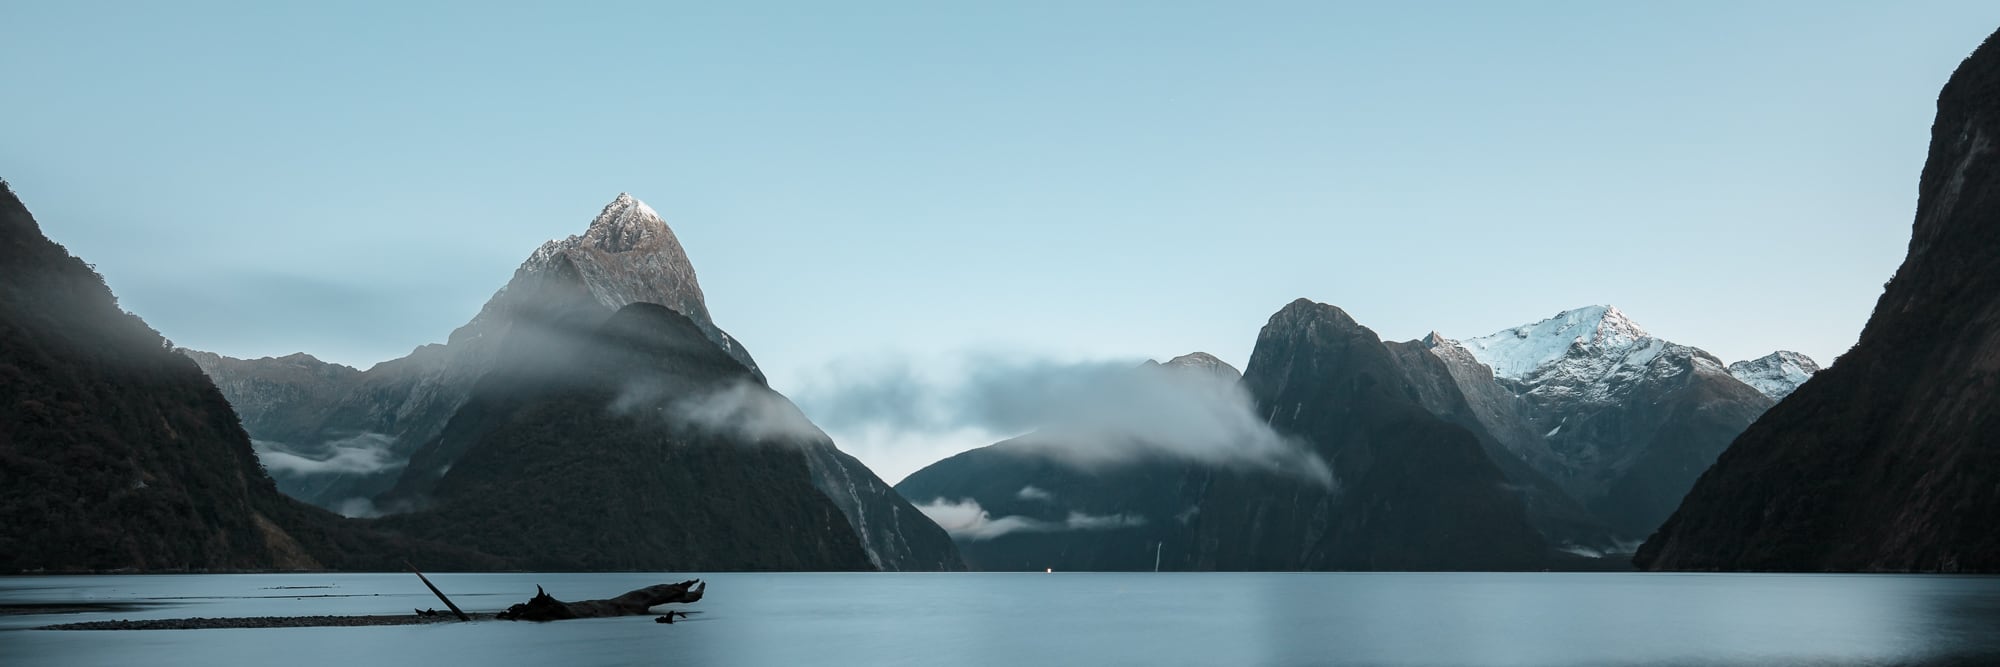 Panoramic view of Milford Sound in New Zealand, with the sunrise illuminating the mountain peaks and casting a tranquil light over the still waters.